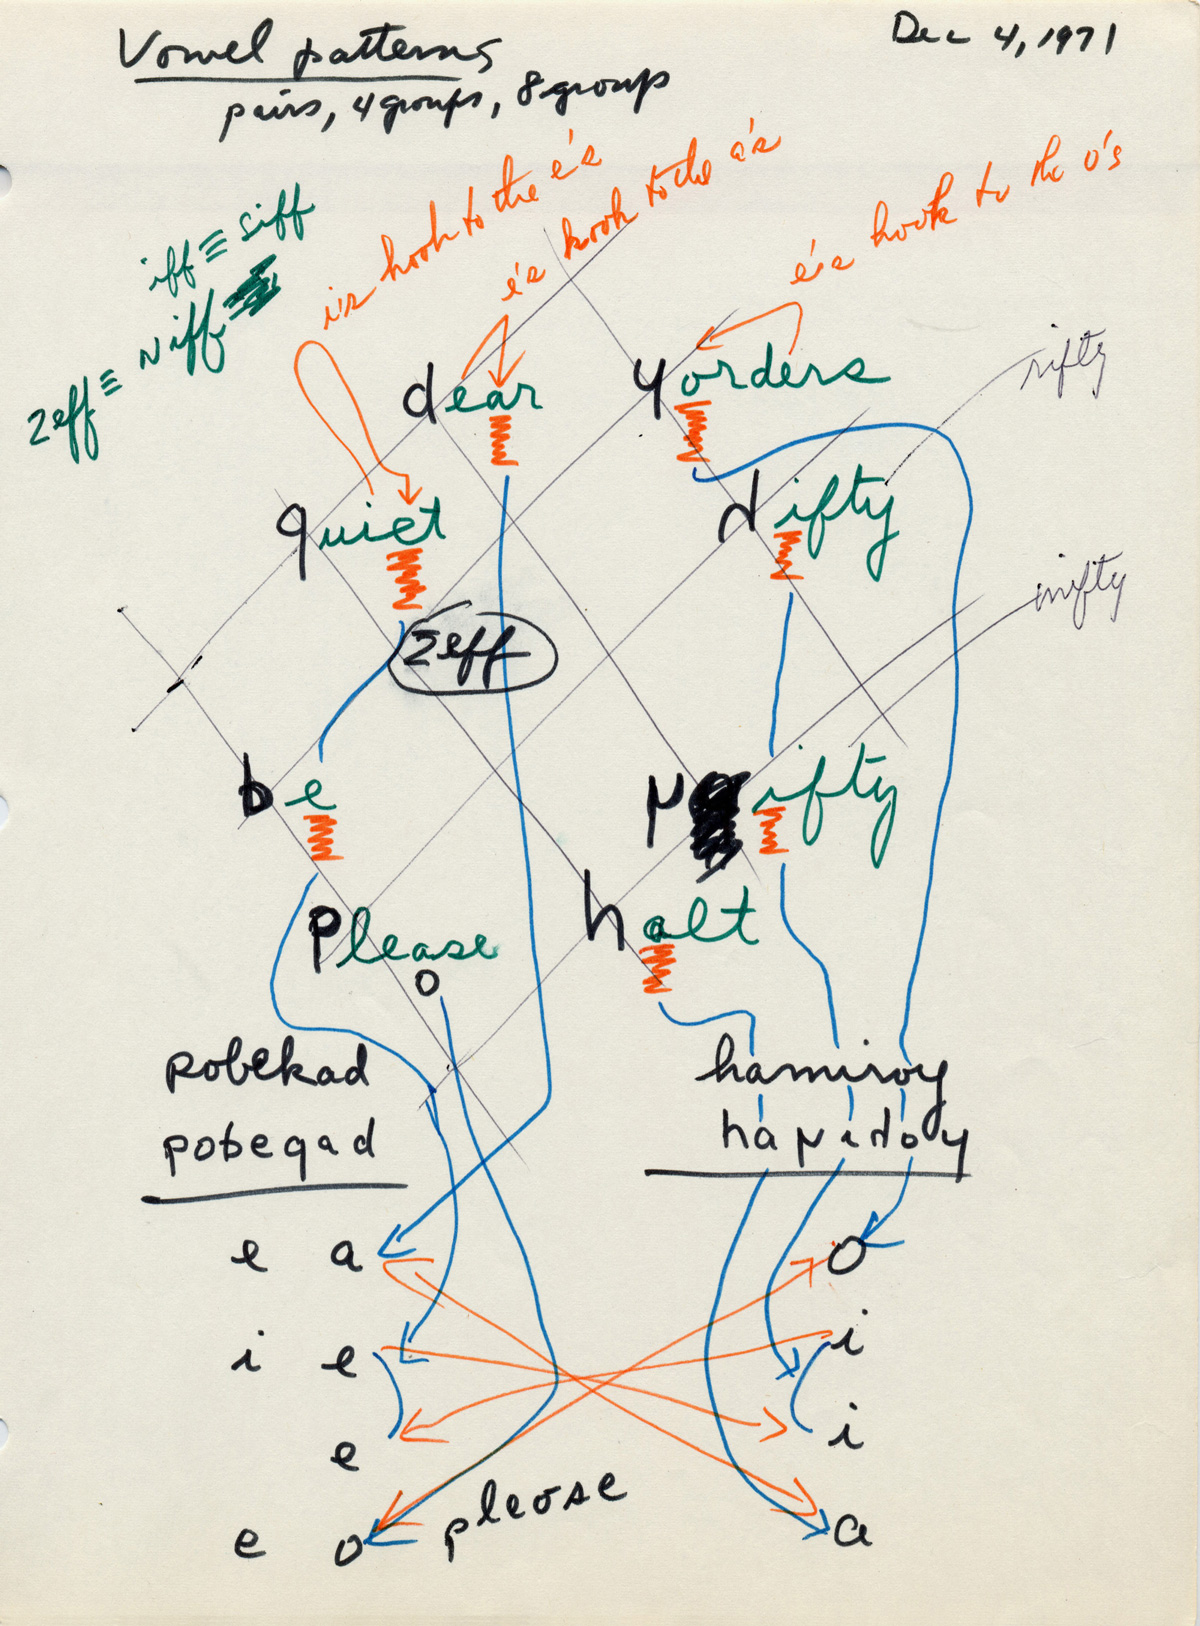 A page of Zellweger’s complex linguistic notations and diagrams, dated December 4, 1971.